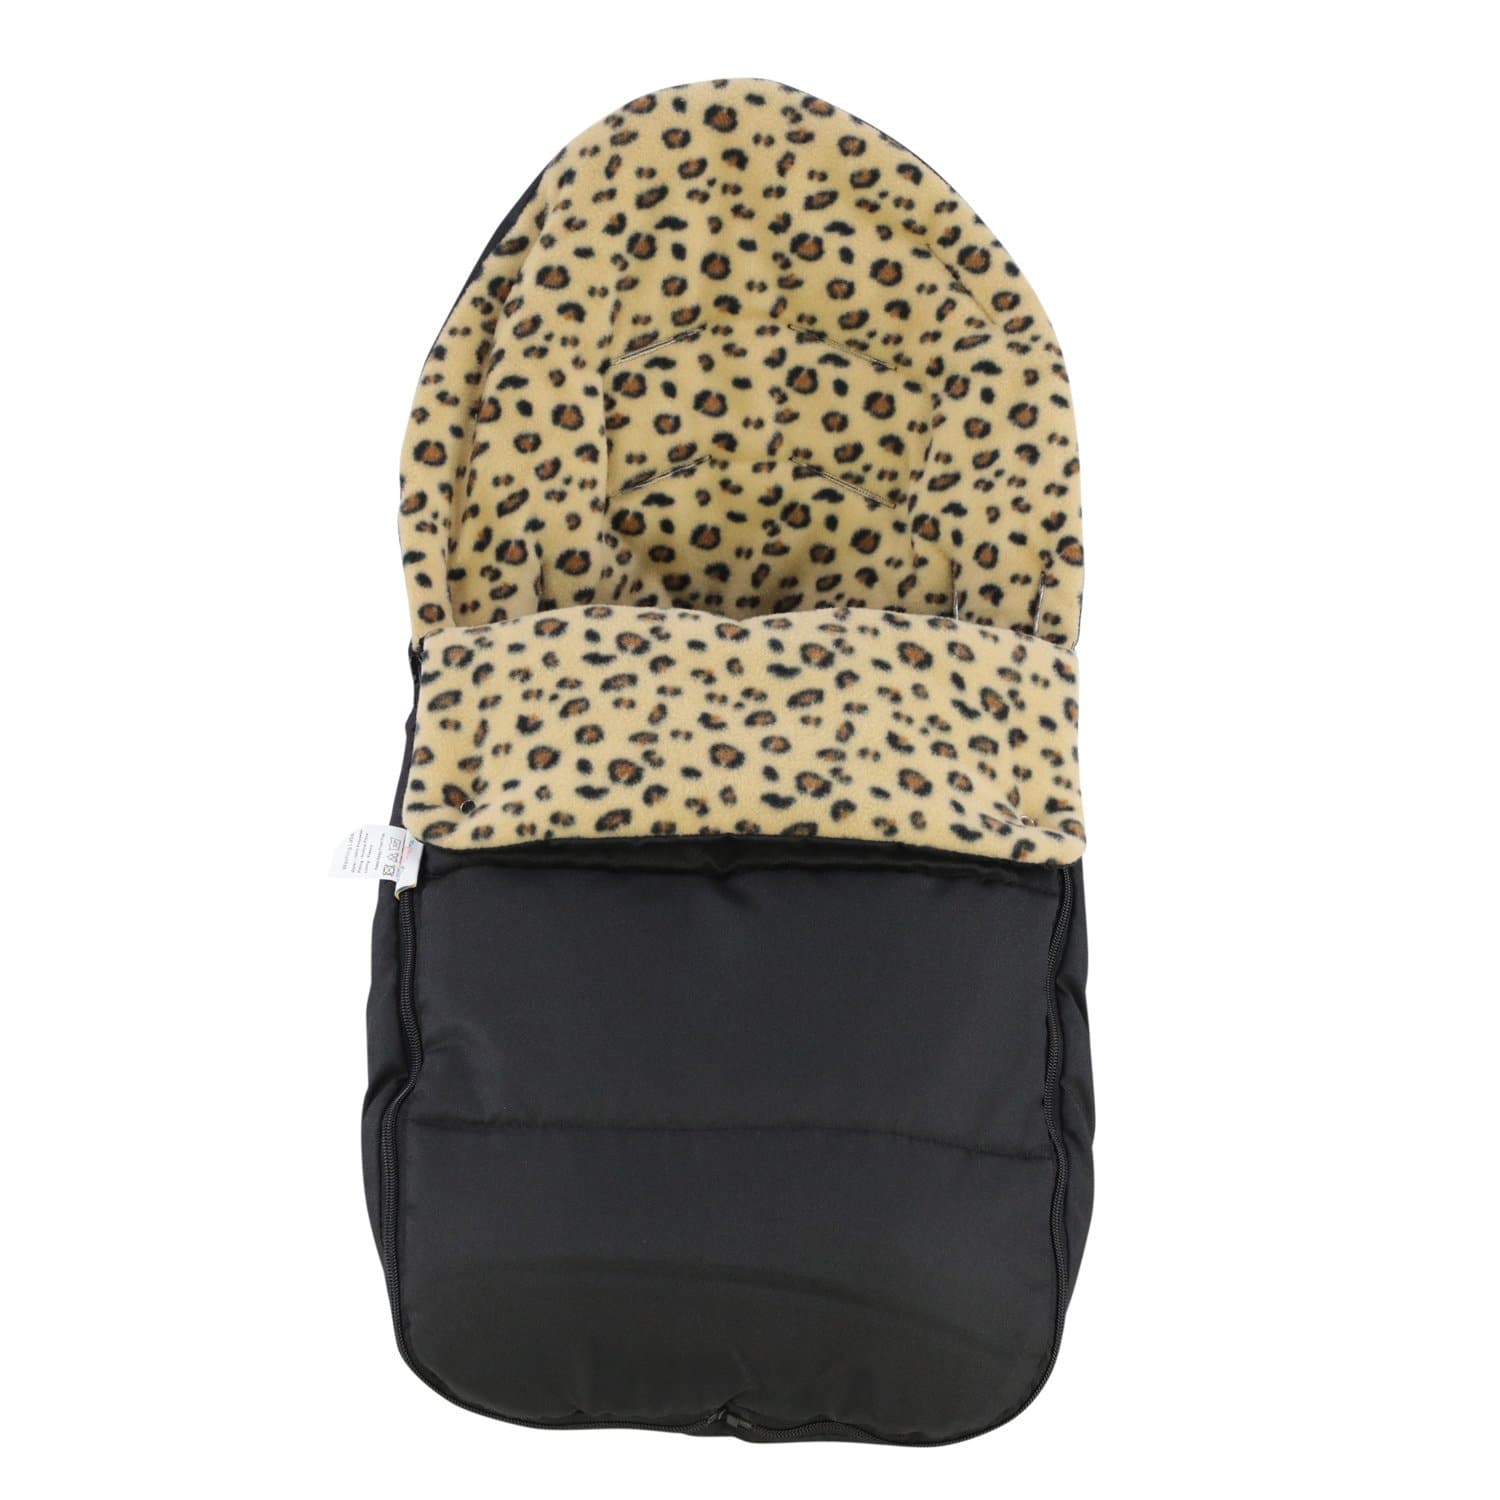 Universal Animal Print Car Seat Footmuff / Cosy Toes - Fits All 3 And 5 Point Harnesses - Fits All Models - Leopard / Fits All Models | For Your Little One